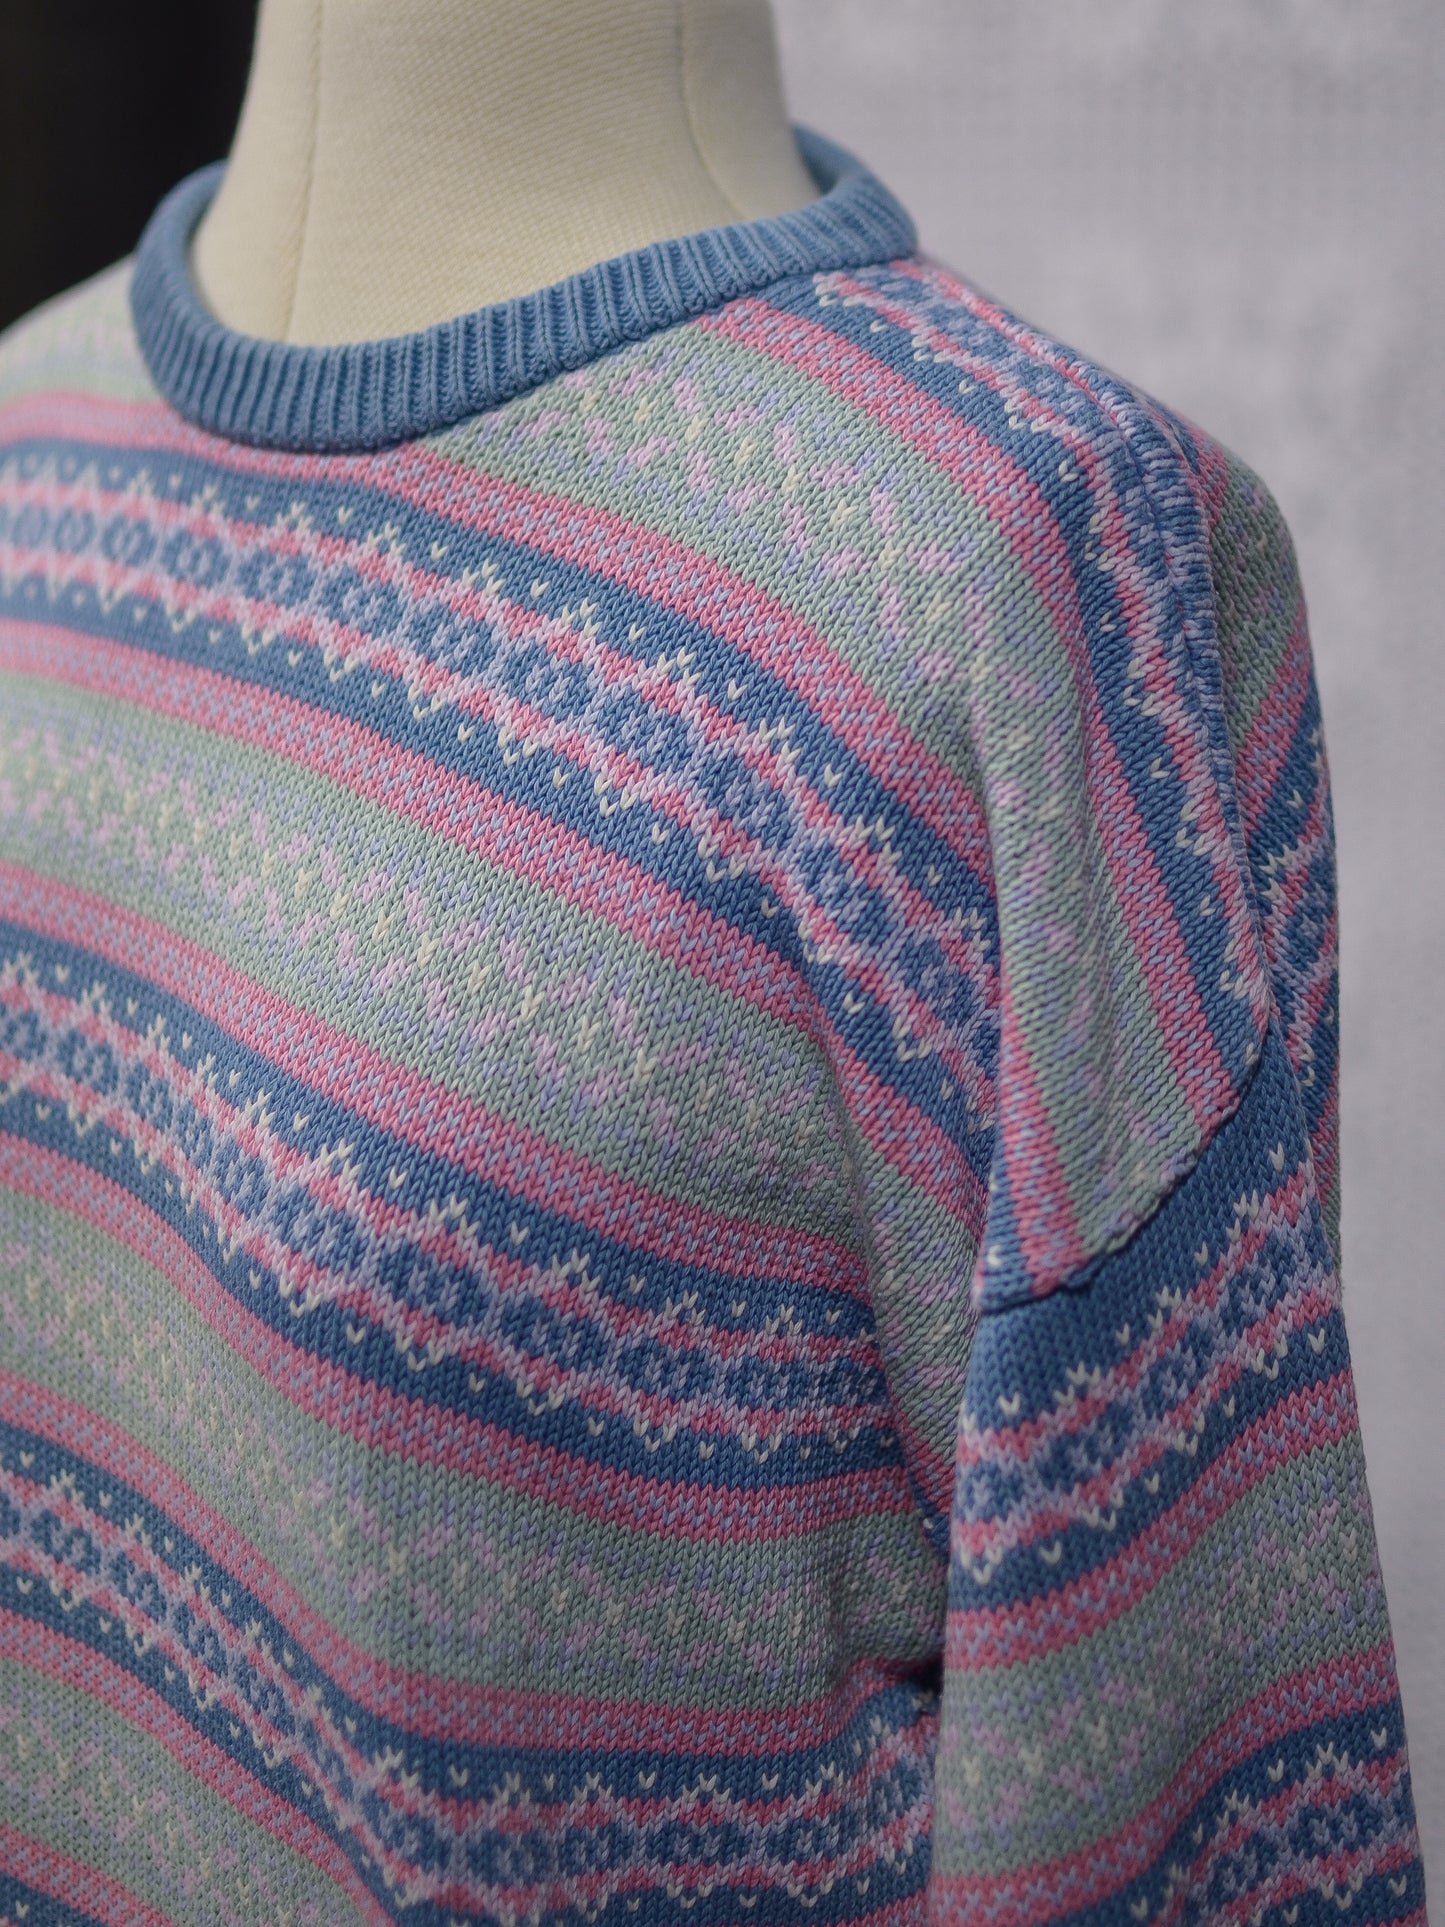 1990s Laura Ashley turquoise and pink striped fair isle striped cotton jumper